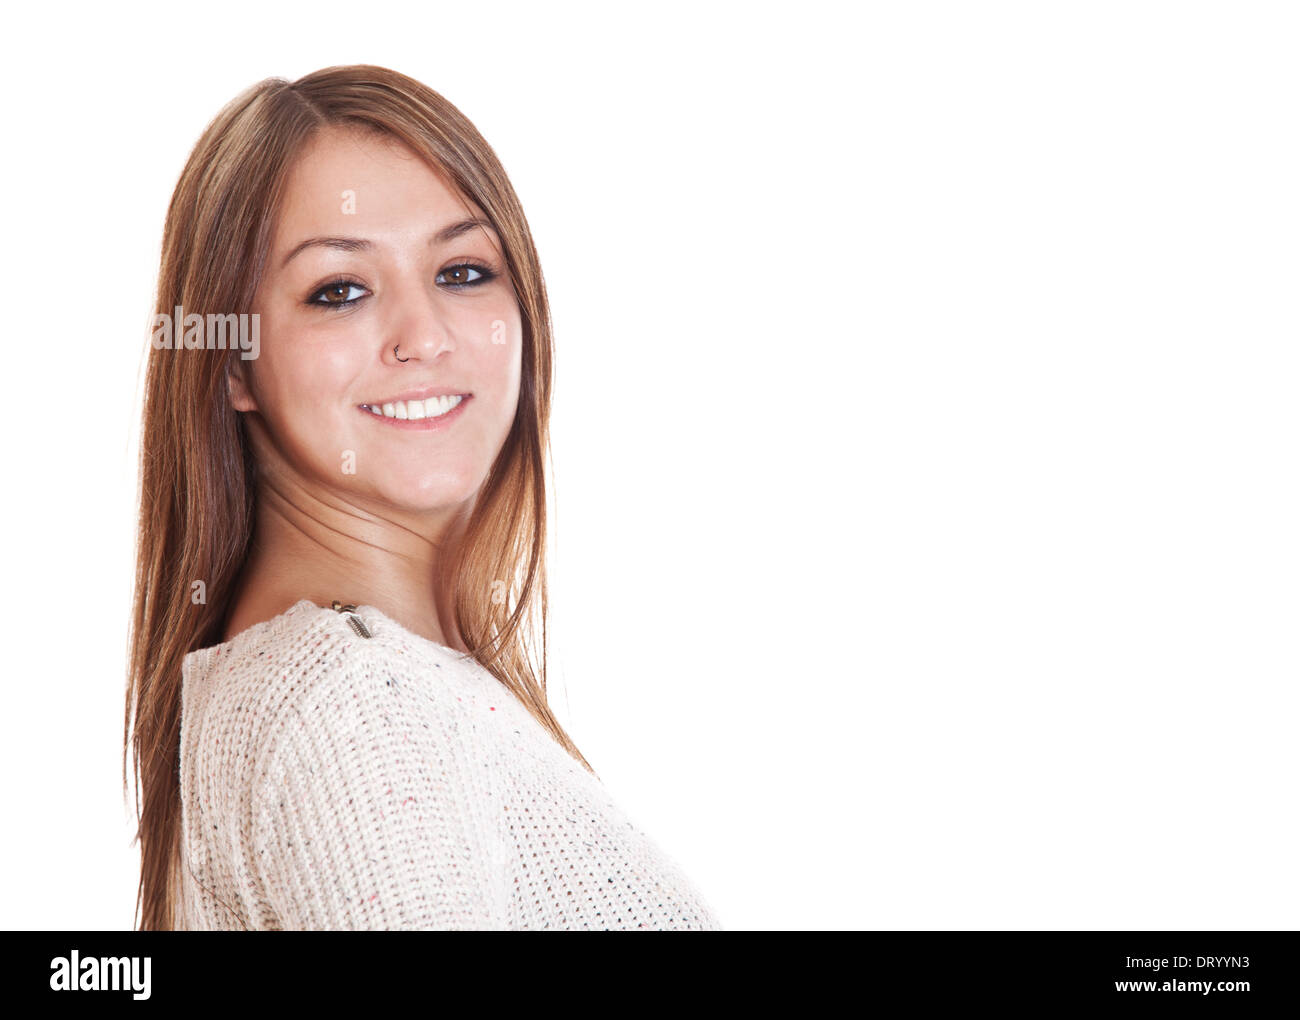 Attractive young woman. All on white background. Stock Photo